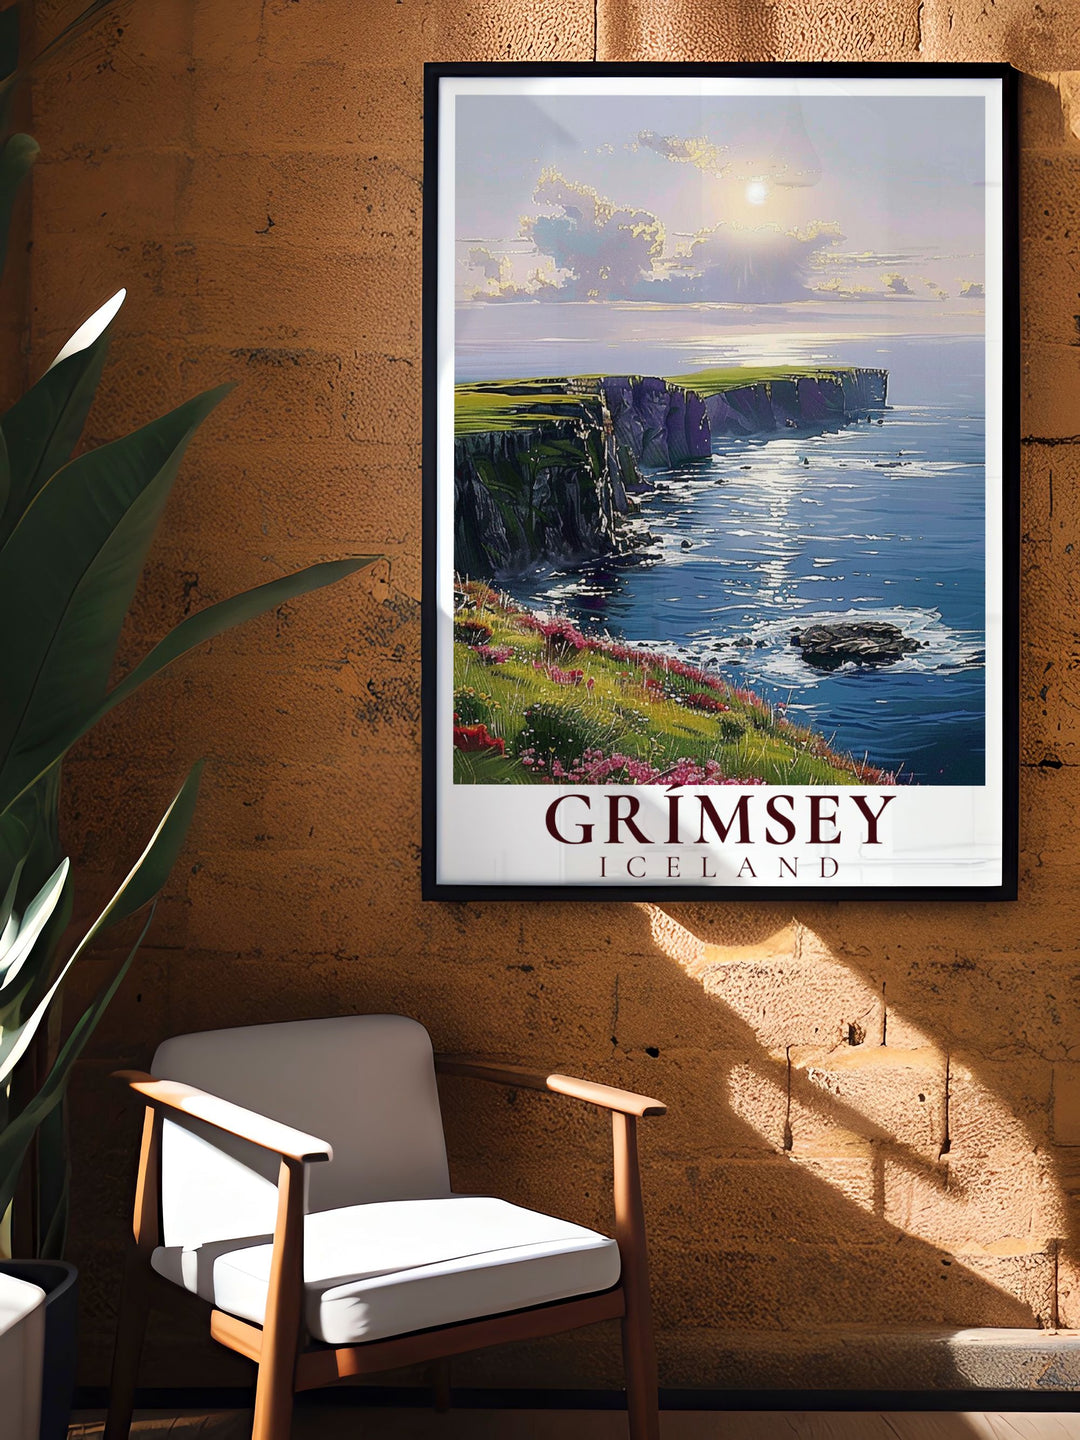 An intricate illustration of Grimsey Islands wildlife, including puffins and coastal scenery, bringing the islands natural charm and biodiversity into your living space.